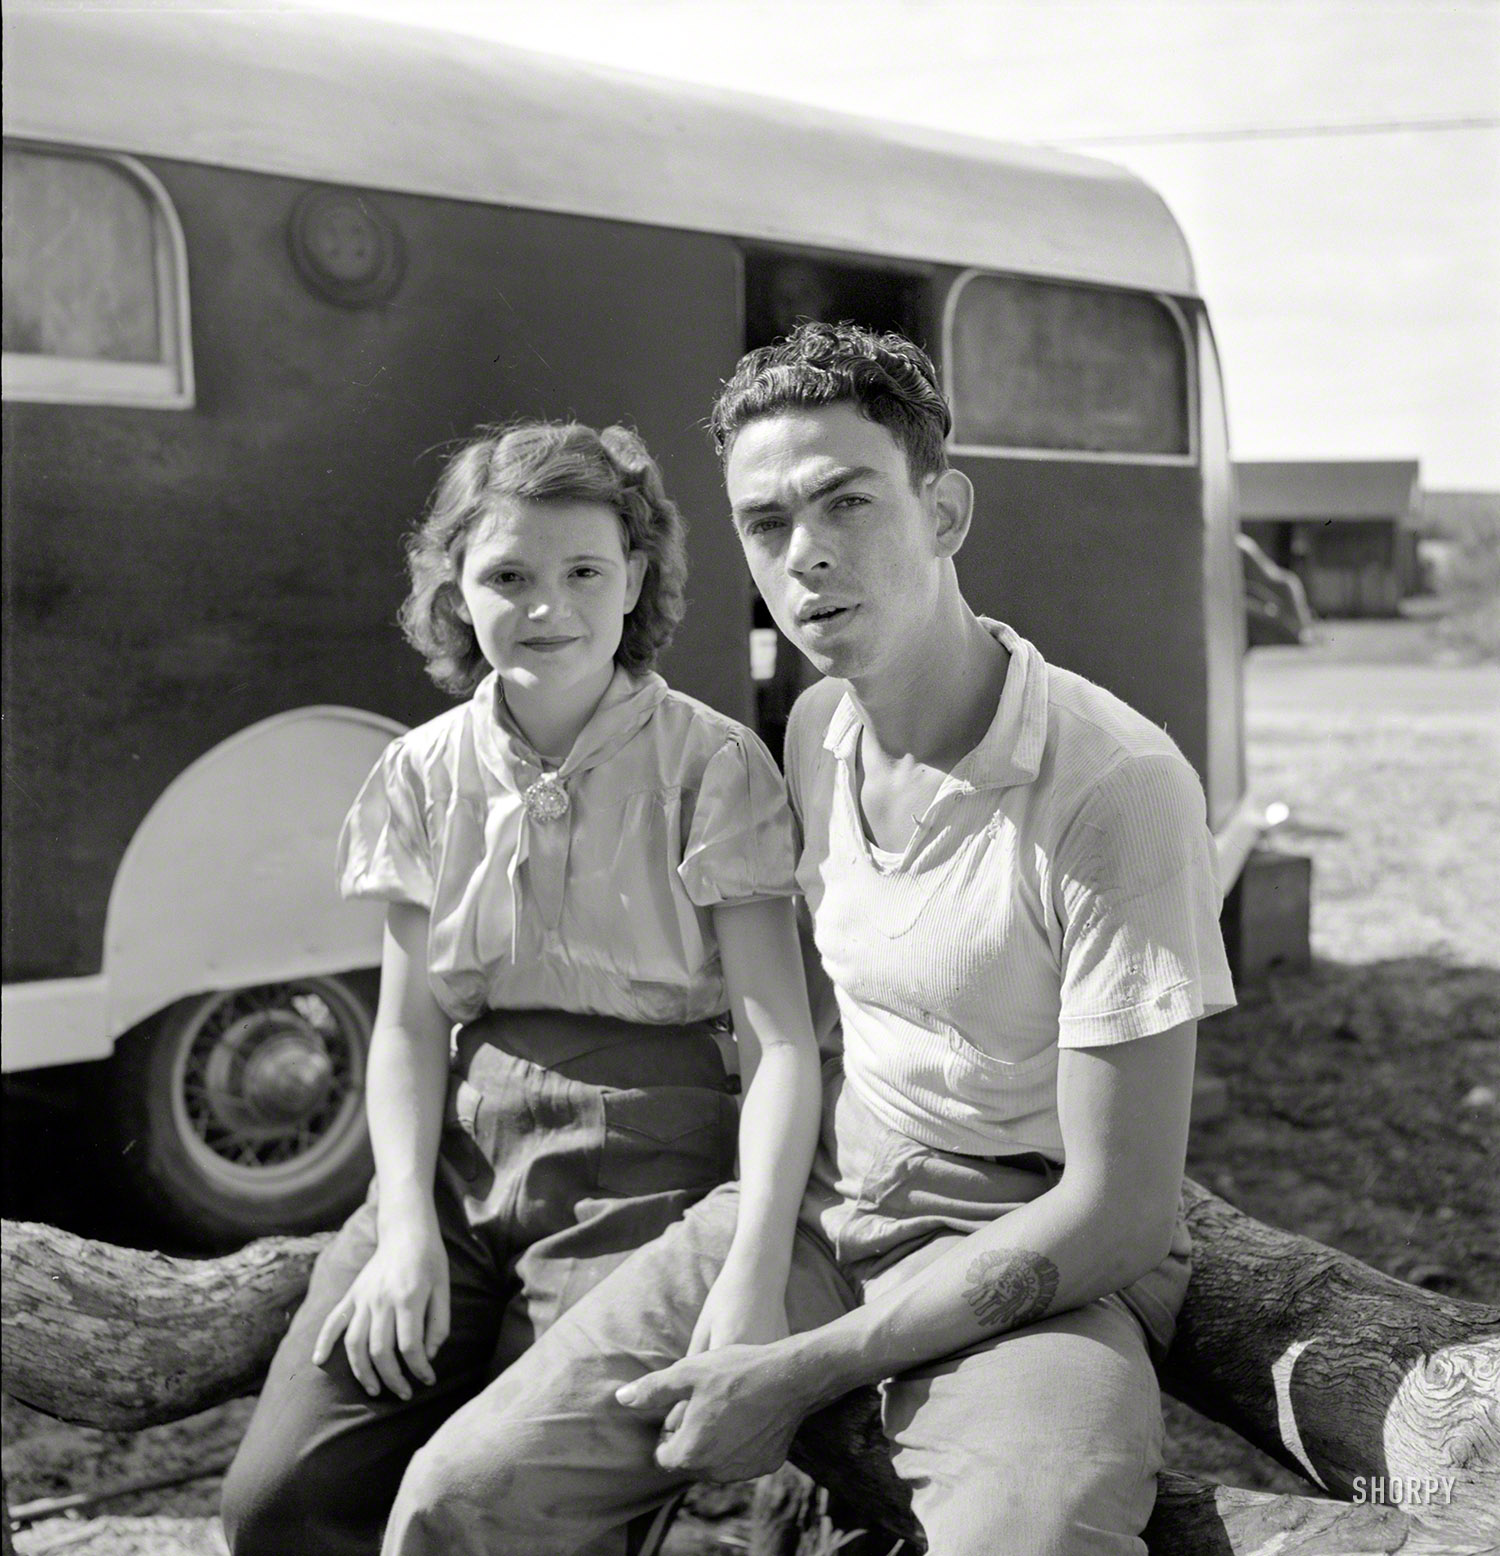 February 1939. "Young couple, migrant laborers, who work in packinghouse at Canal Point, Florida." The girl seen earlier here. Medium-format nitrate negative by Marion Post Wolcott for the Resettlement Administration. View full size.
